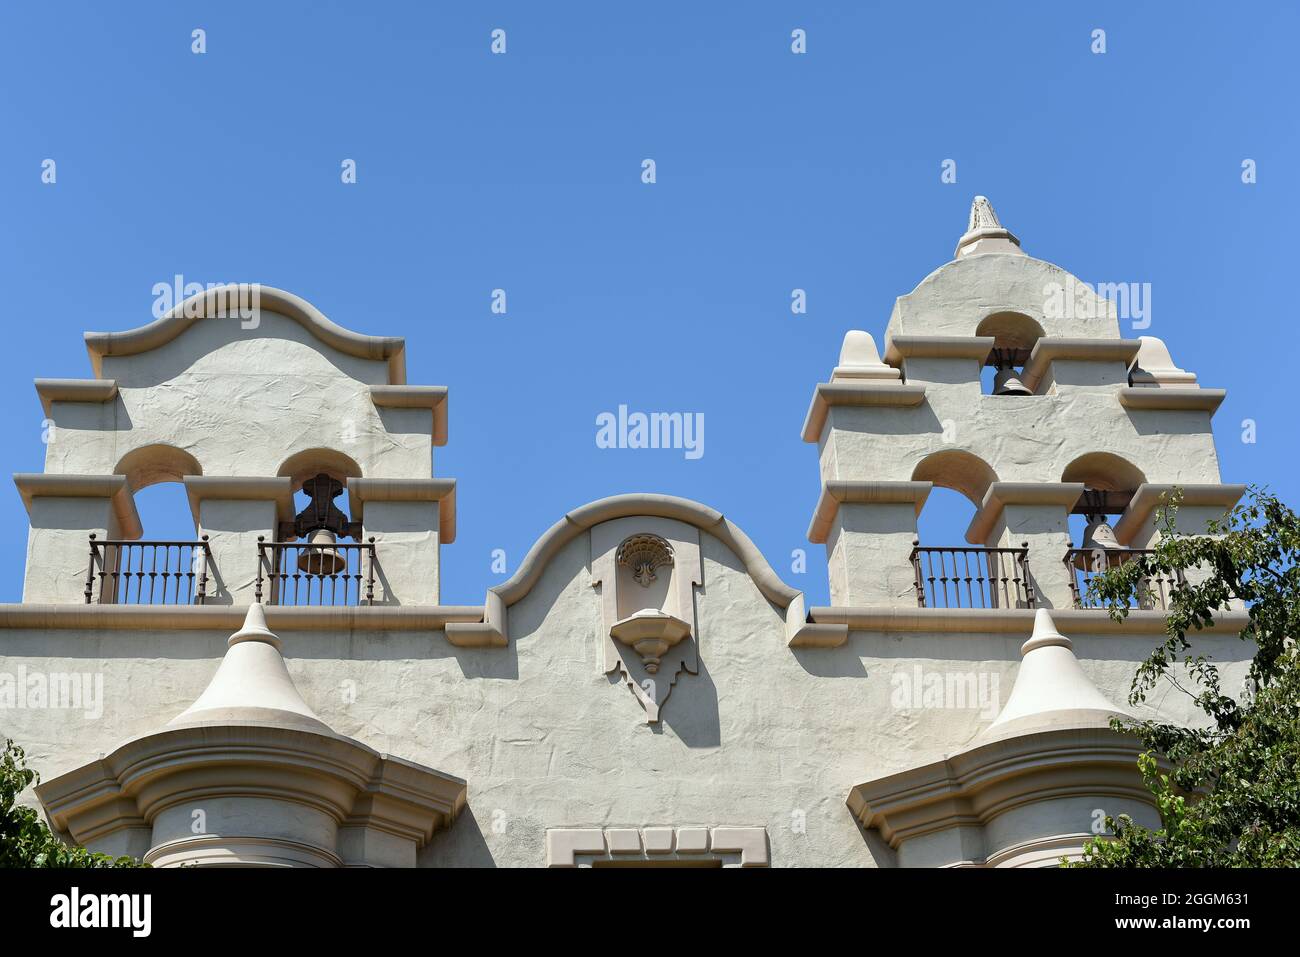 SAN DIEGO, CALIFORNIA - 25 AUG 2021: Bell Tower at the Mingei International Museum, in Balboa Park. Stock Photo